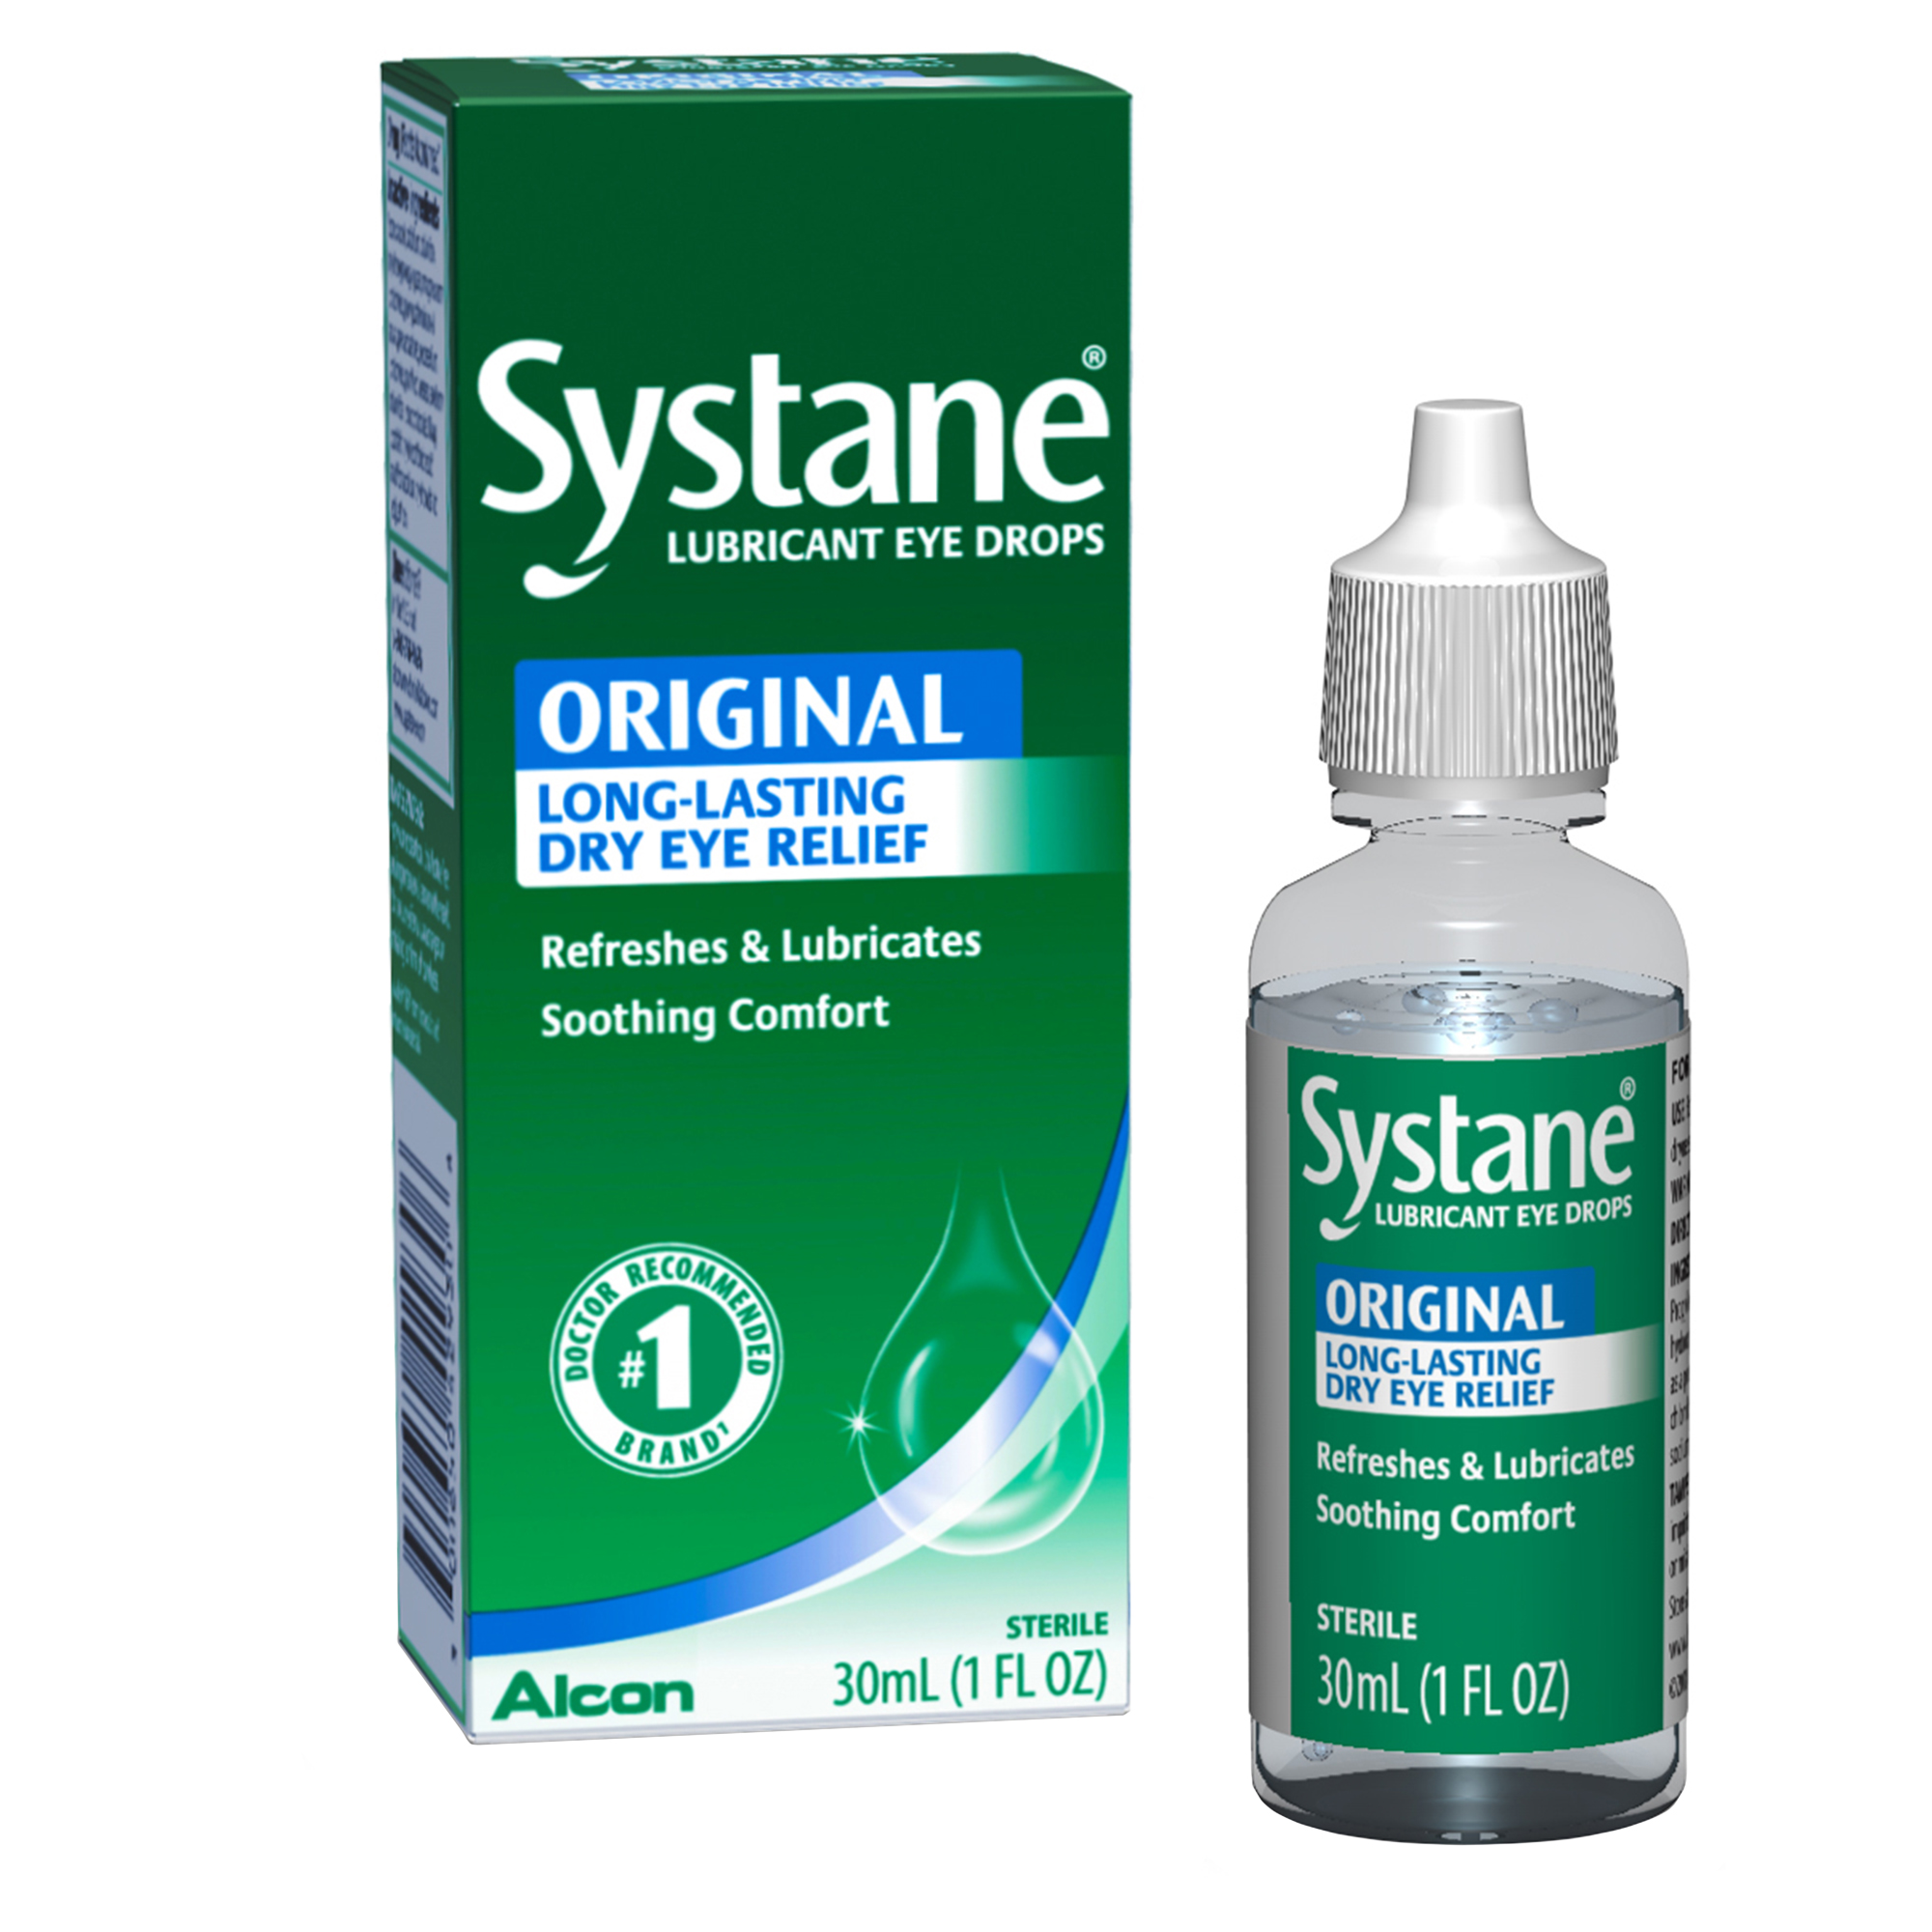 Systane Lubricant Long Lasting Eye Drops for Dry Eye Relief, 30 ml - image 1 of 9